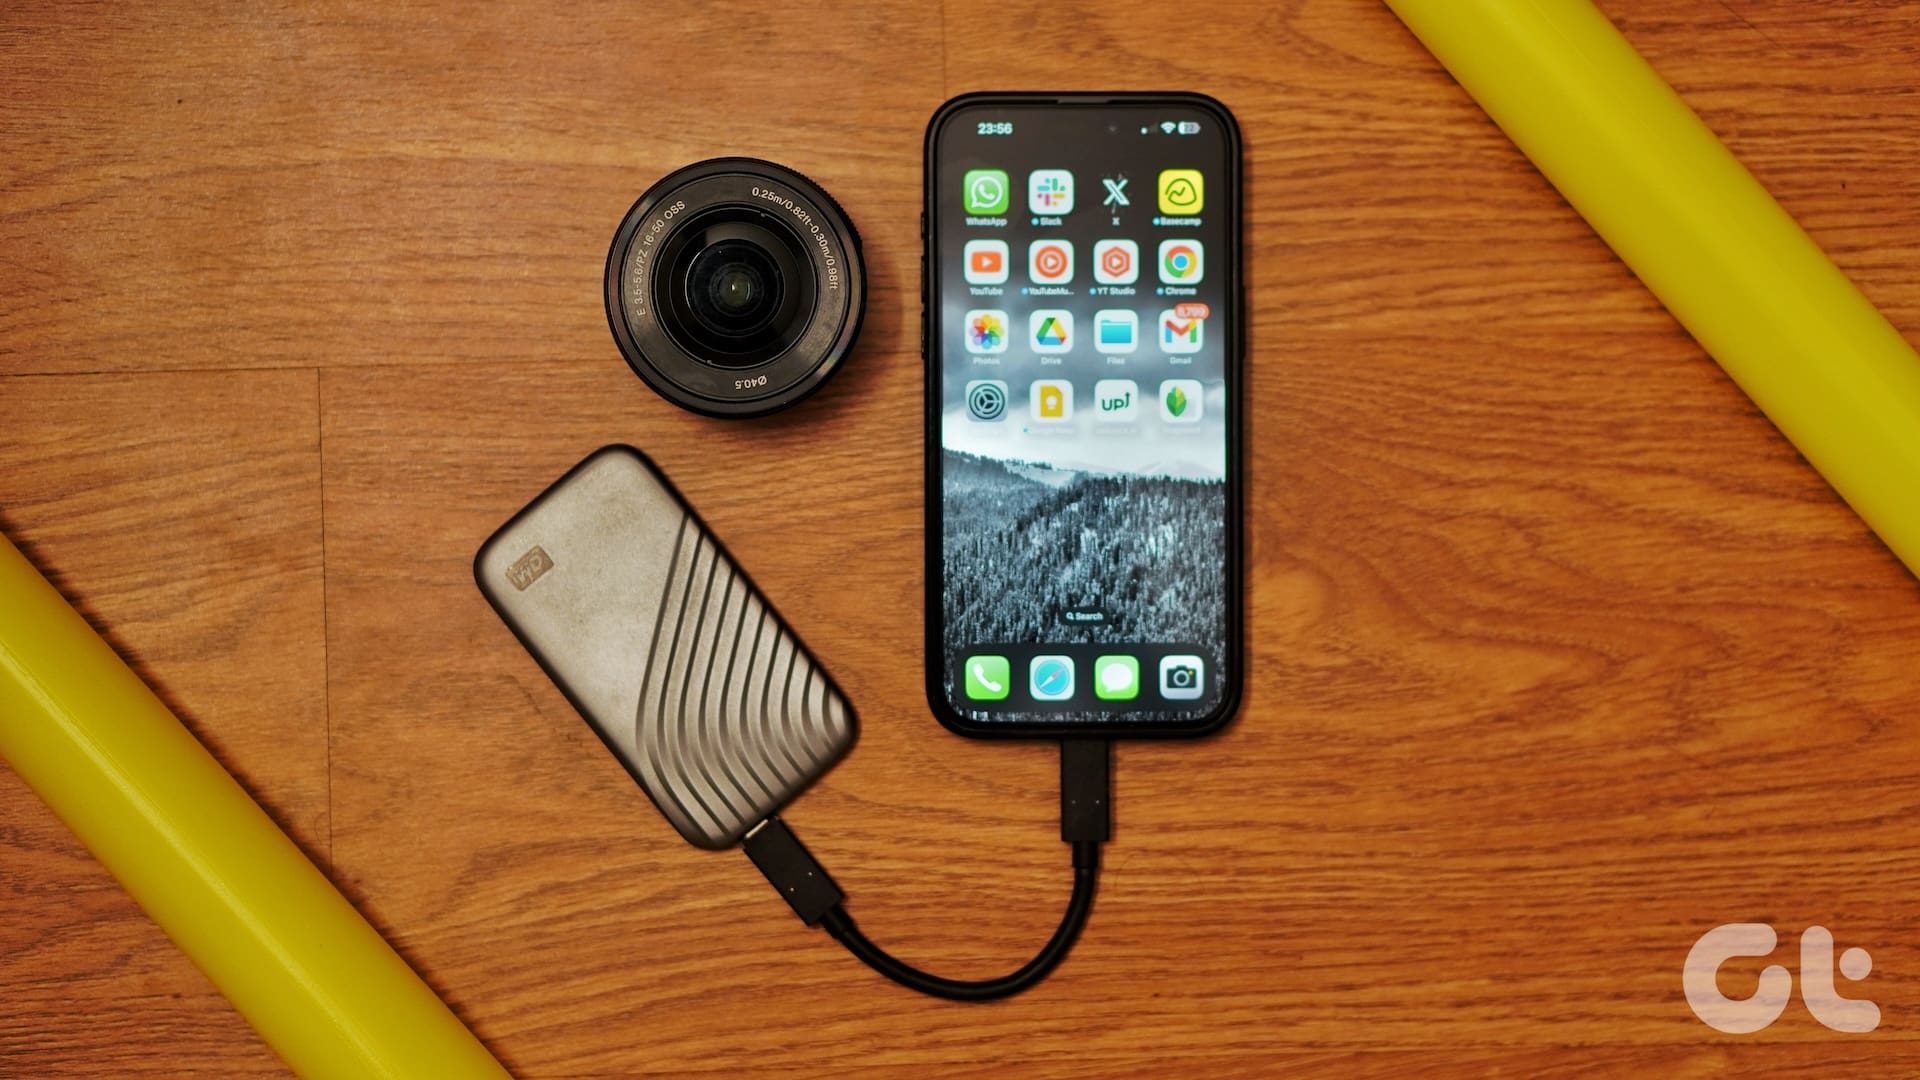 Can I Use an External Drive For Filming on an iPhone?